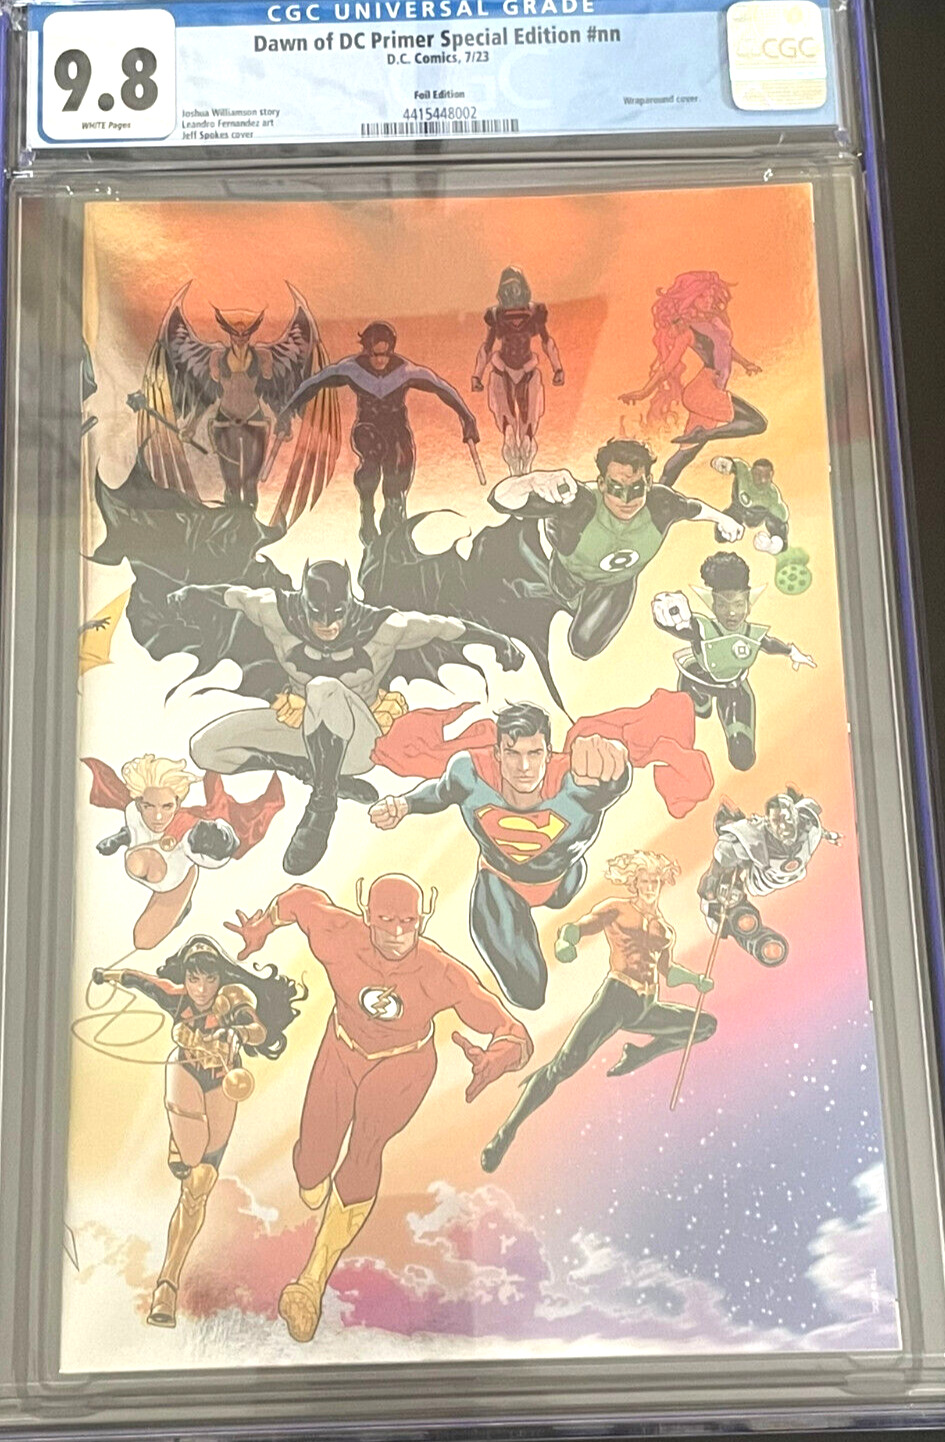 Dawn of DC Primer Special Edition #nn CGC 9.8. Foil Variant DC wrap around cover